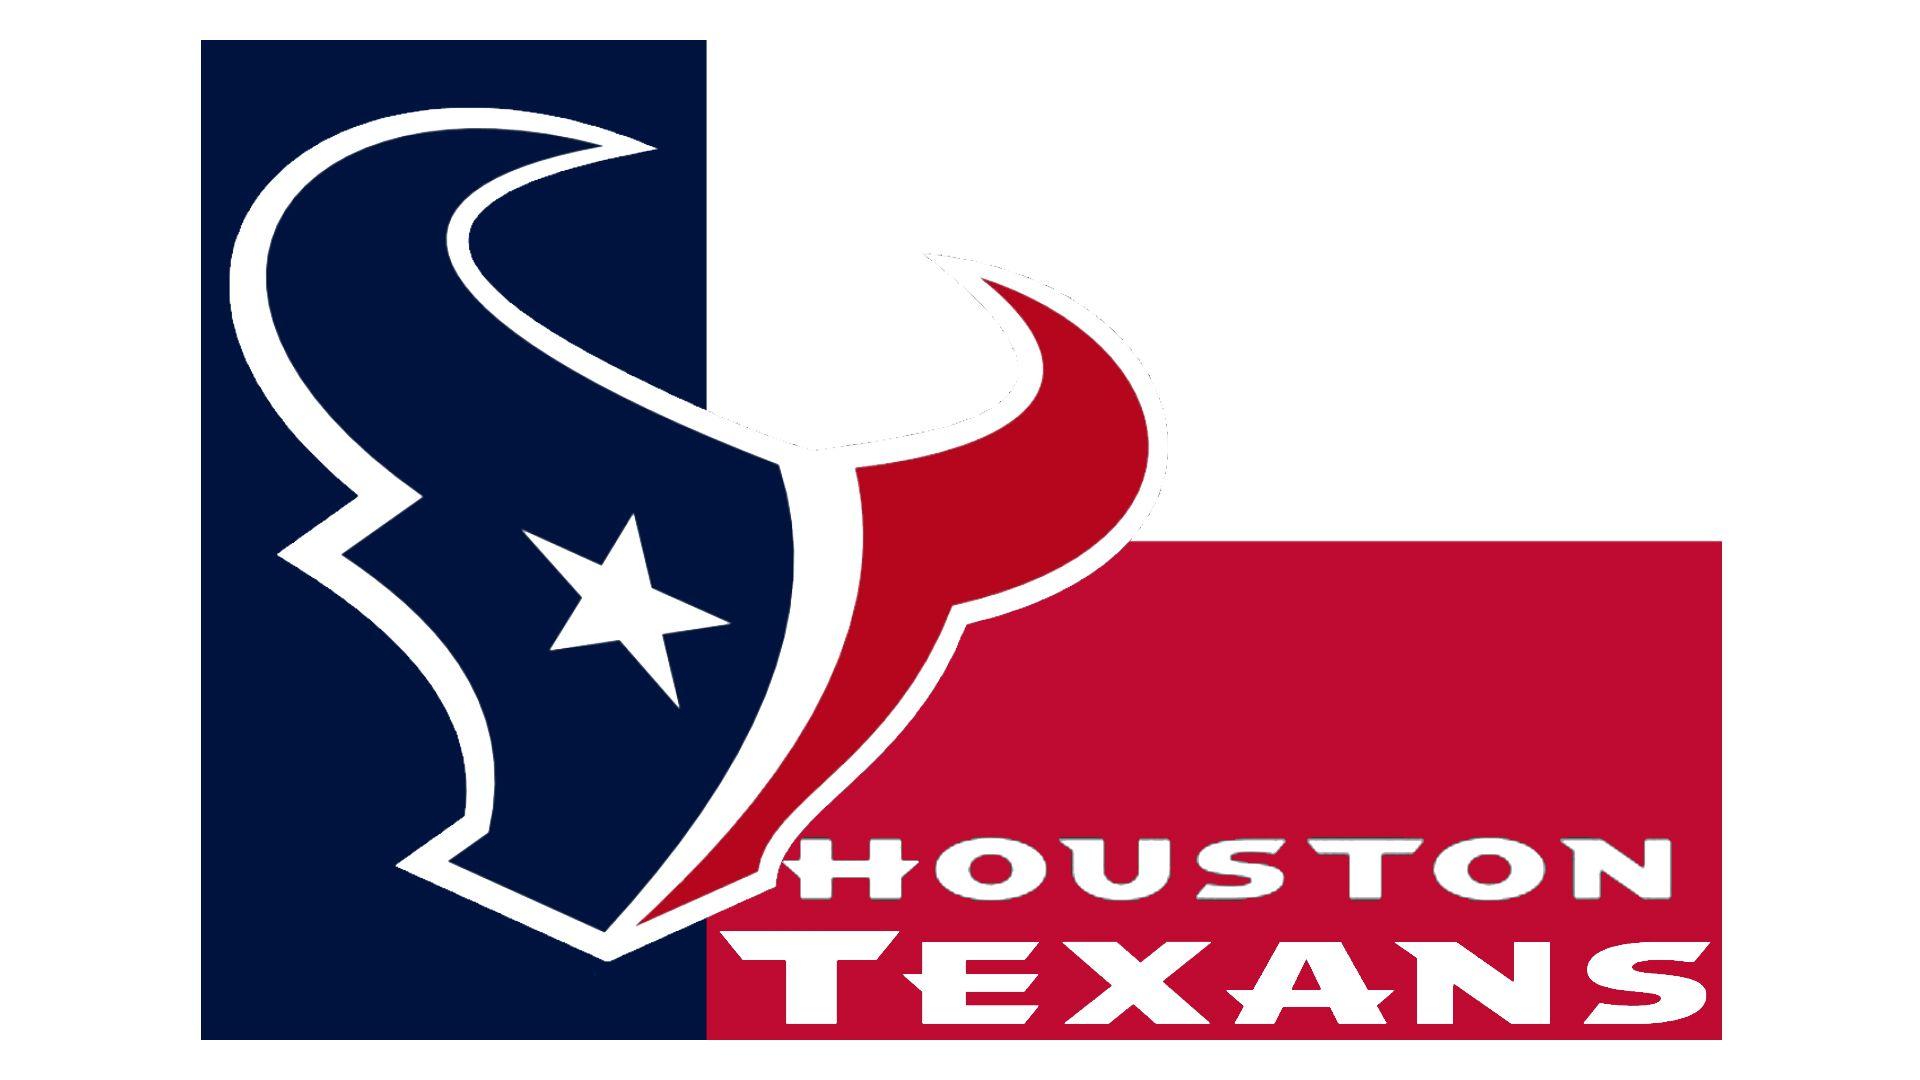 Texasn Logo - Meaning Texans logo and symbol | history and evolution